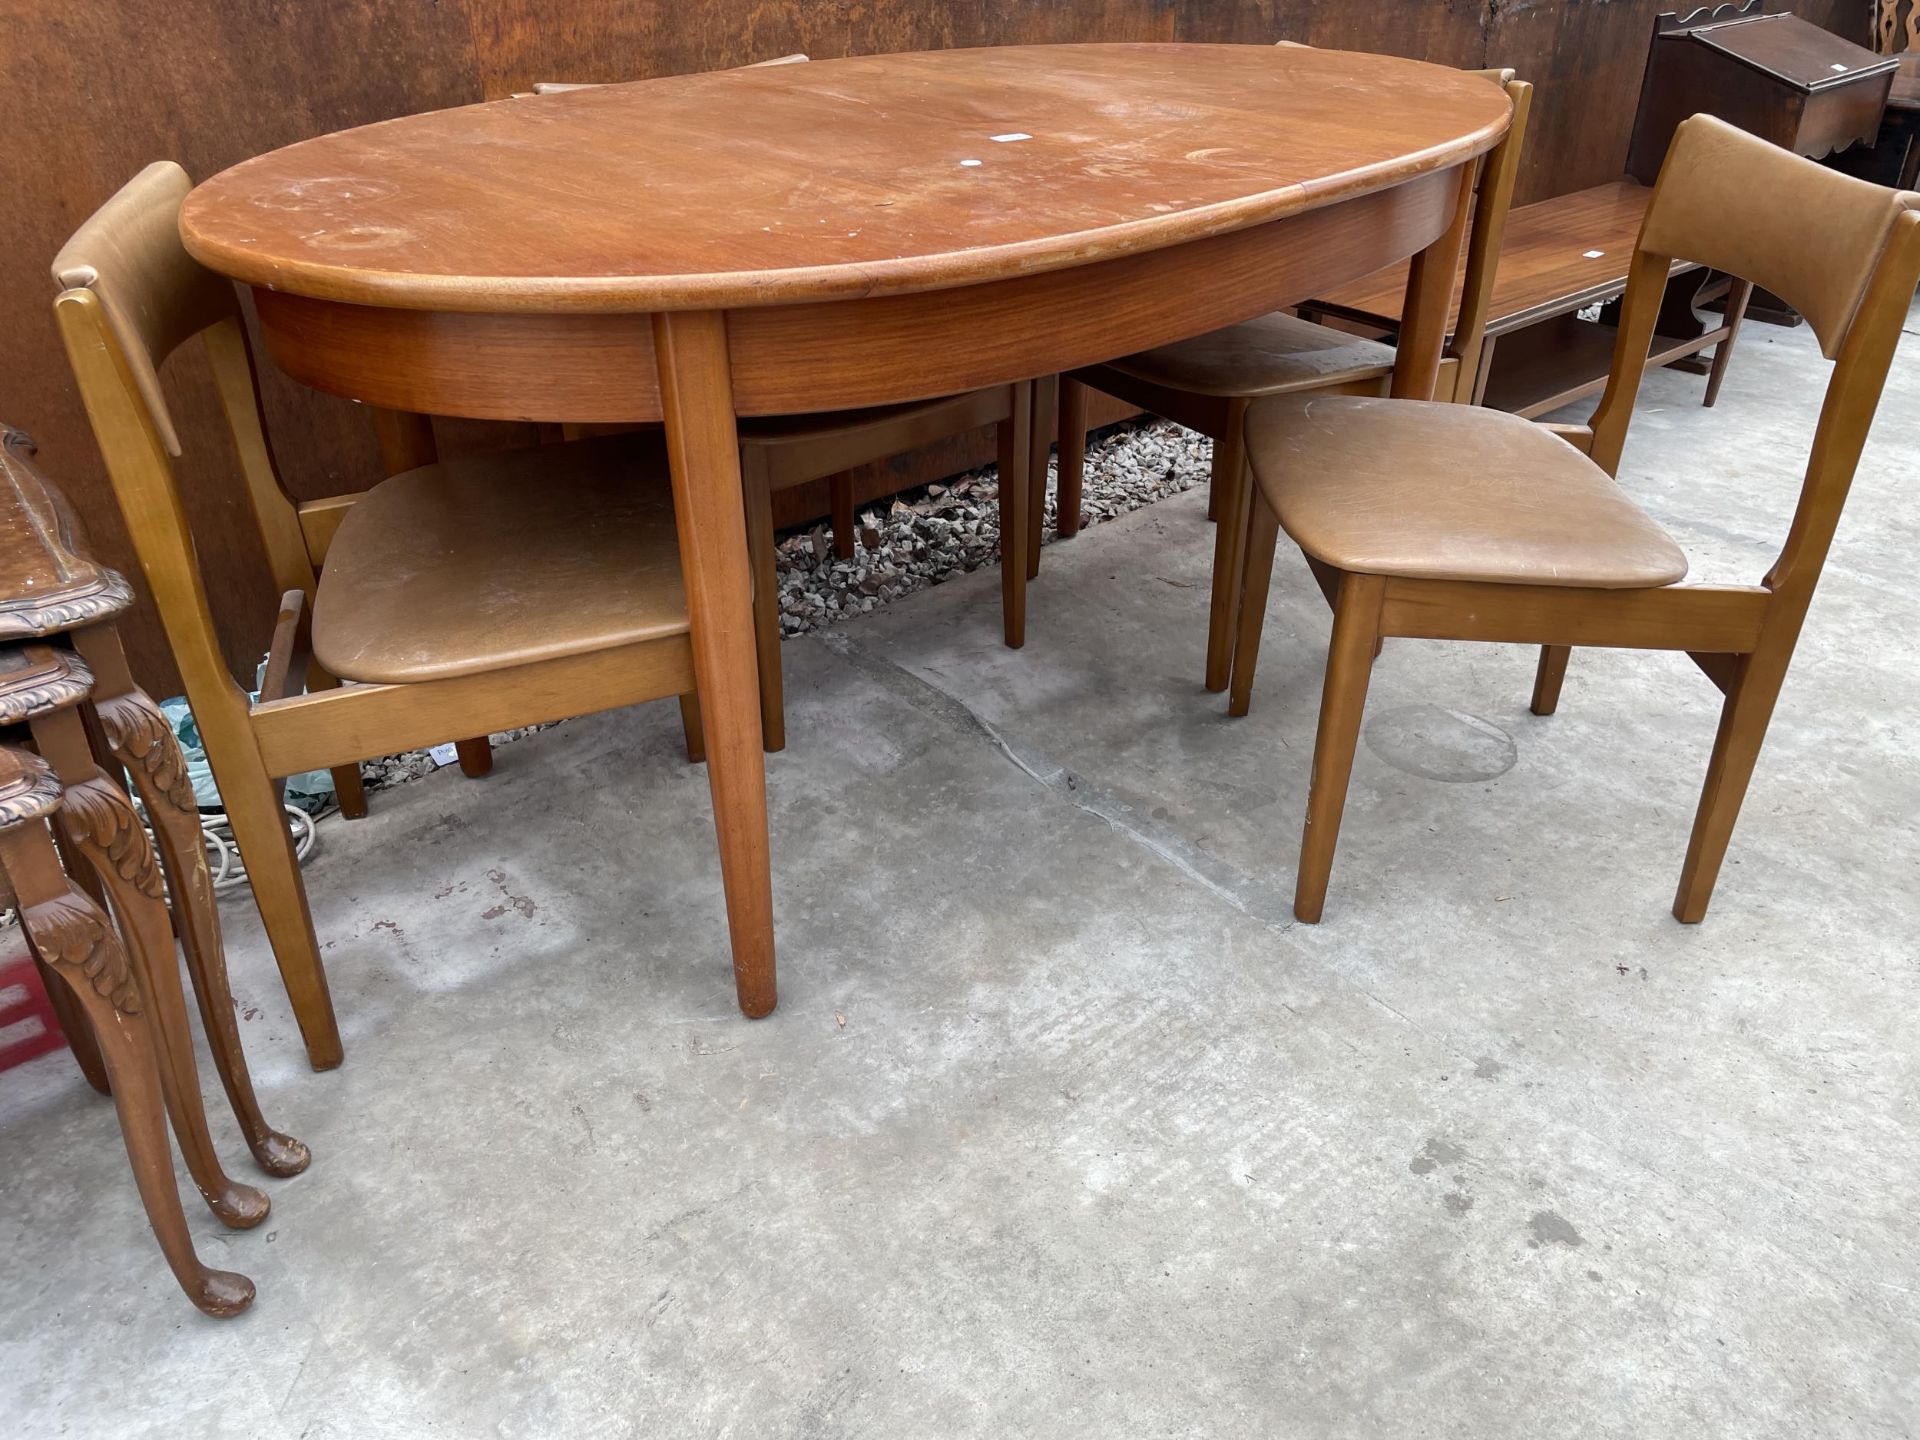 AN OVAL RETRO TEAK EXTENDING DINING TABLE, 60 X 36" (LEAF 18") AND FOUR CHAIRS - Image 3 of 6